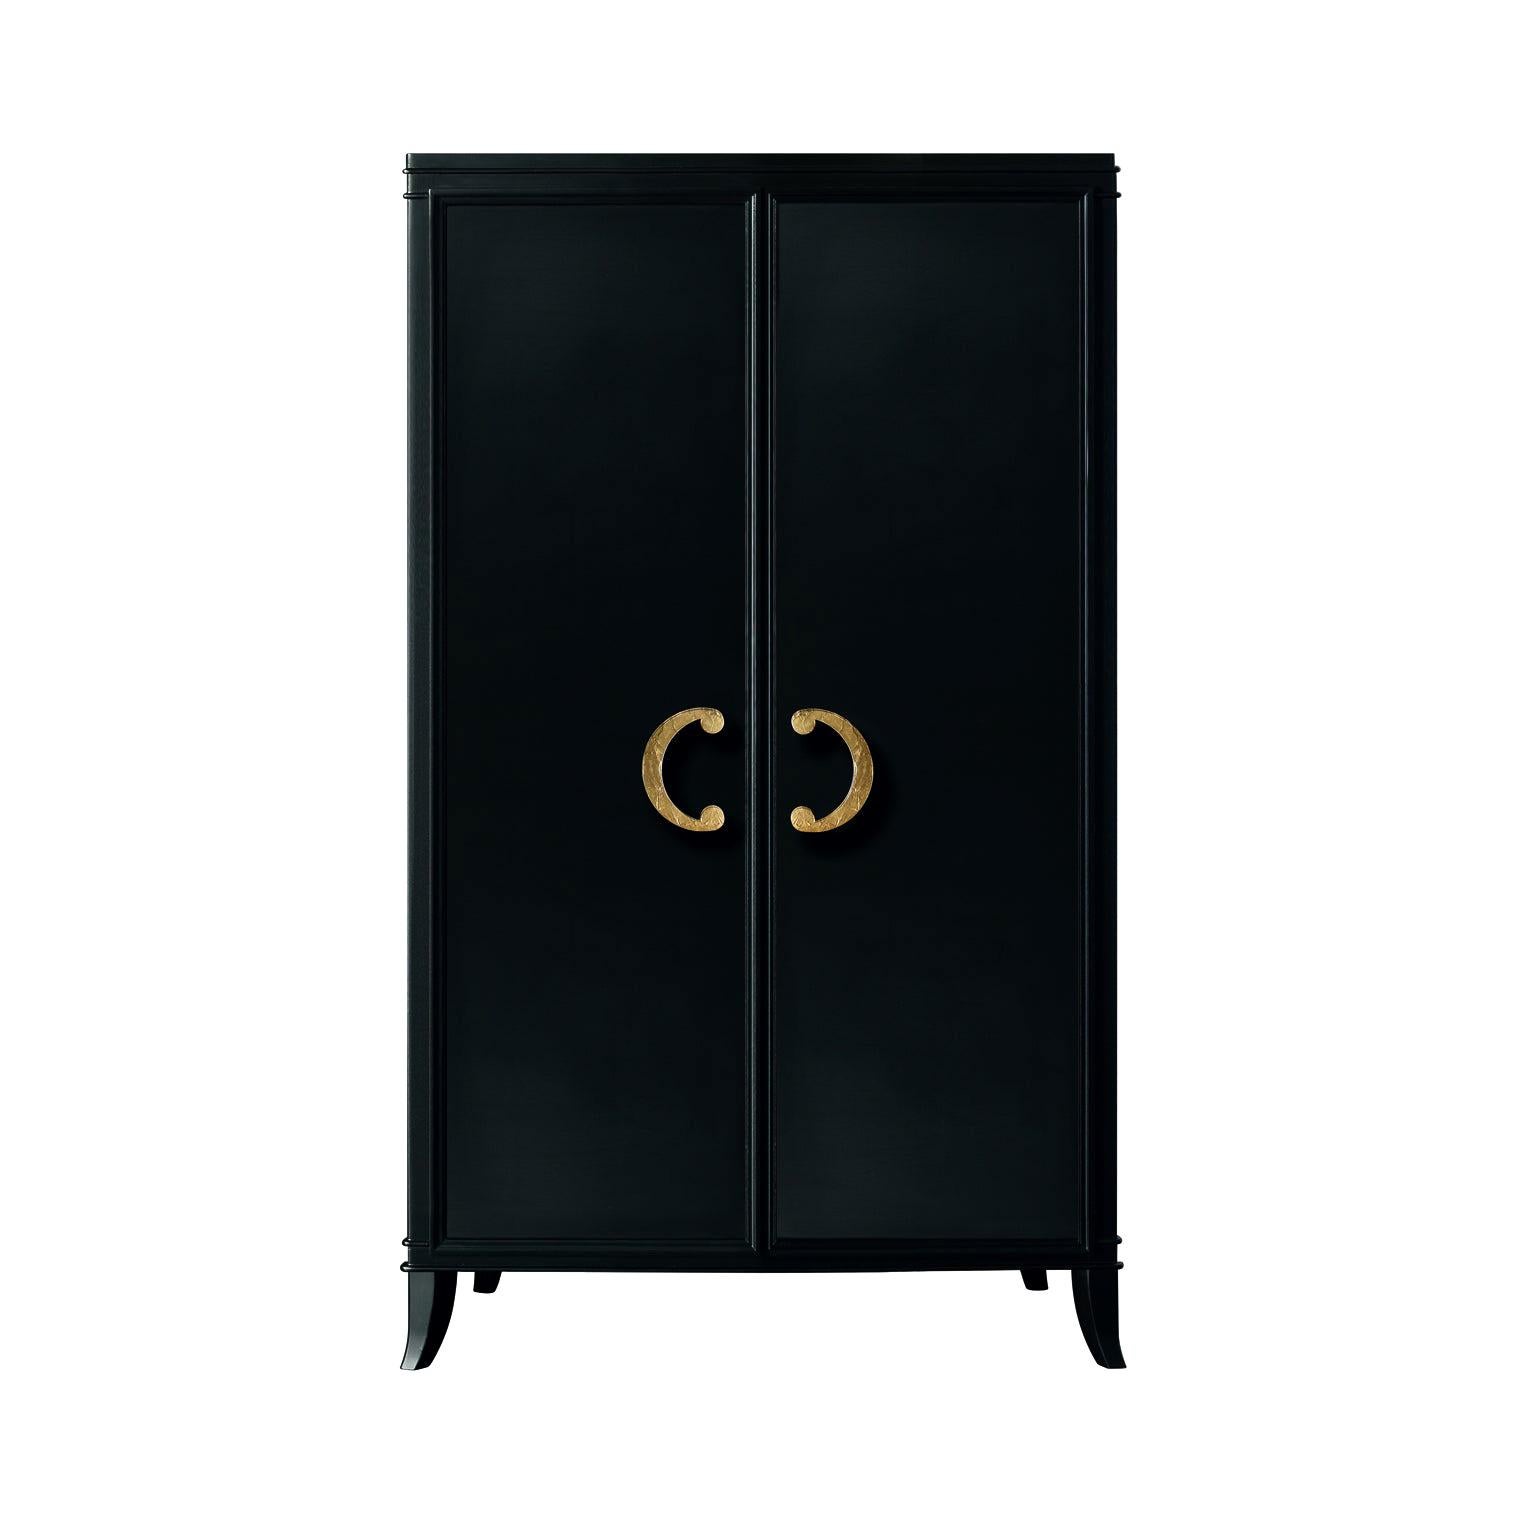 Isabella Costantini, Italy, Olimpia Armoire D45